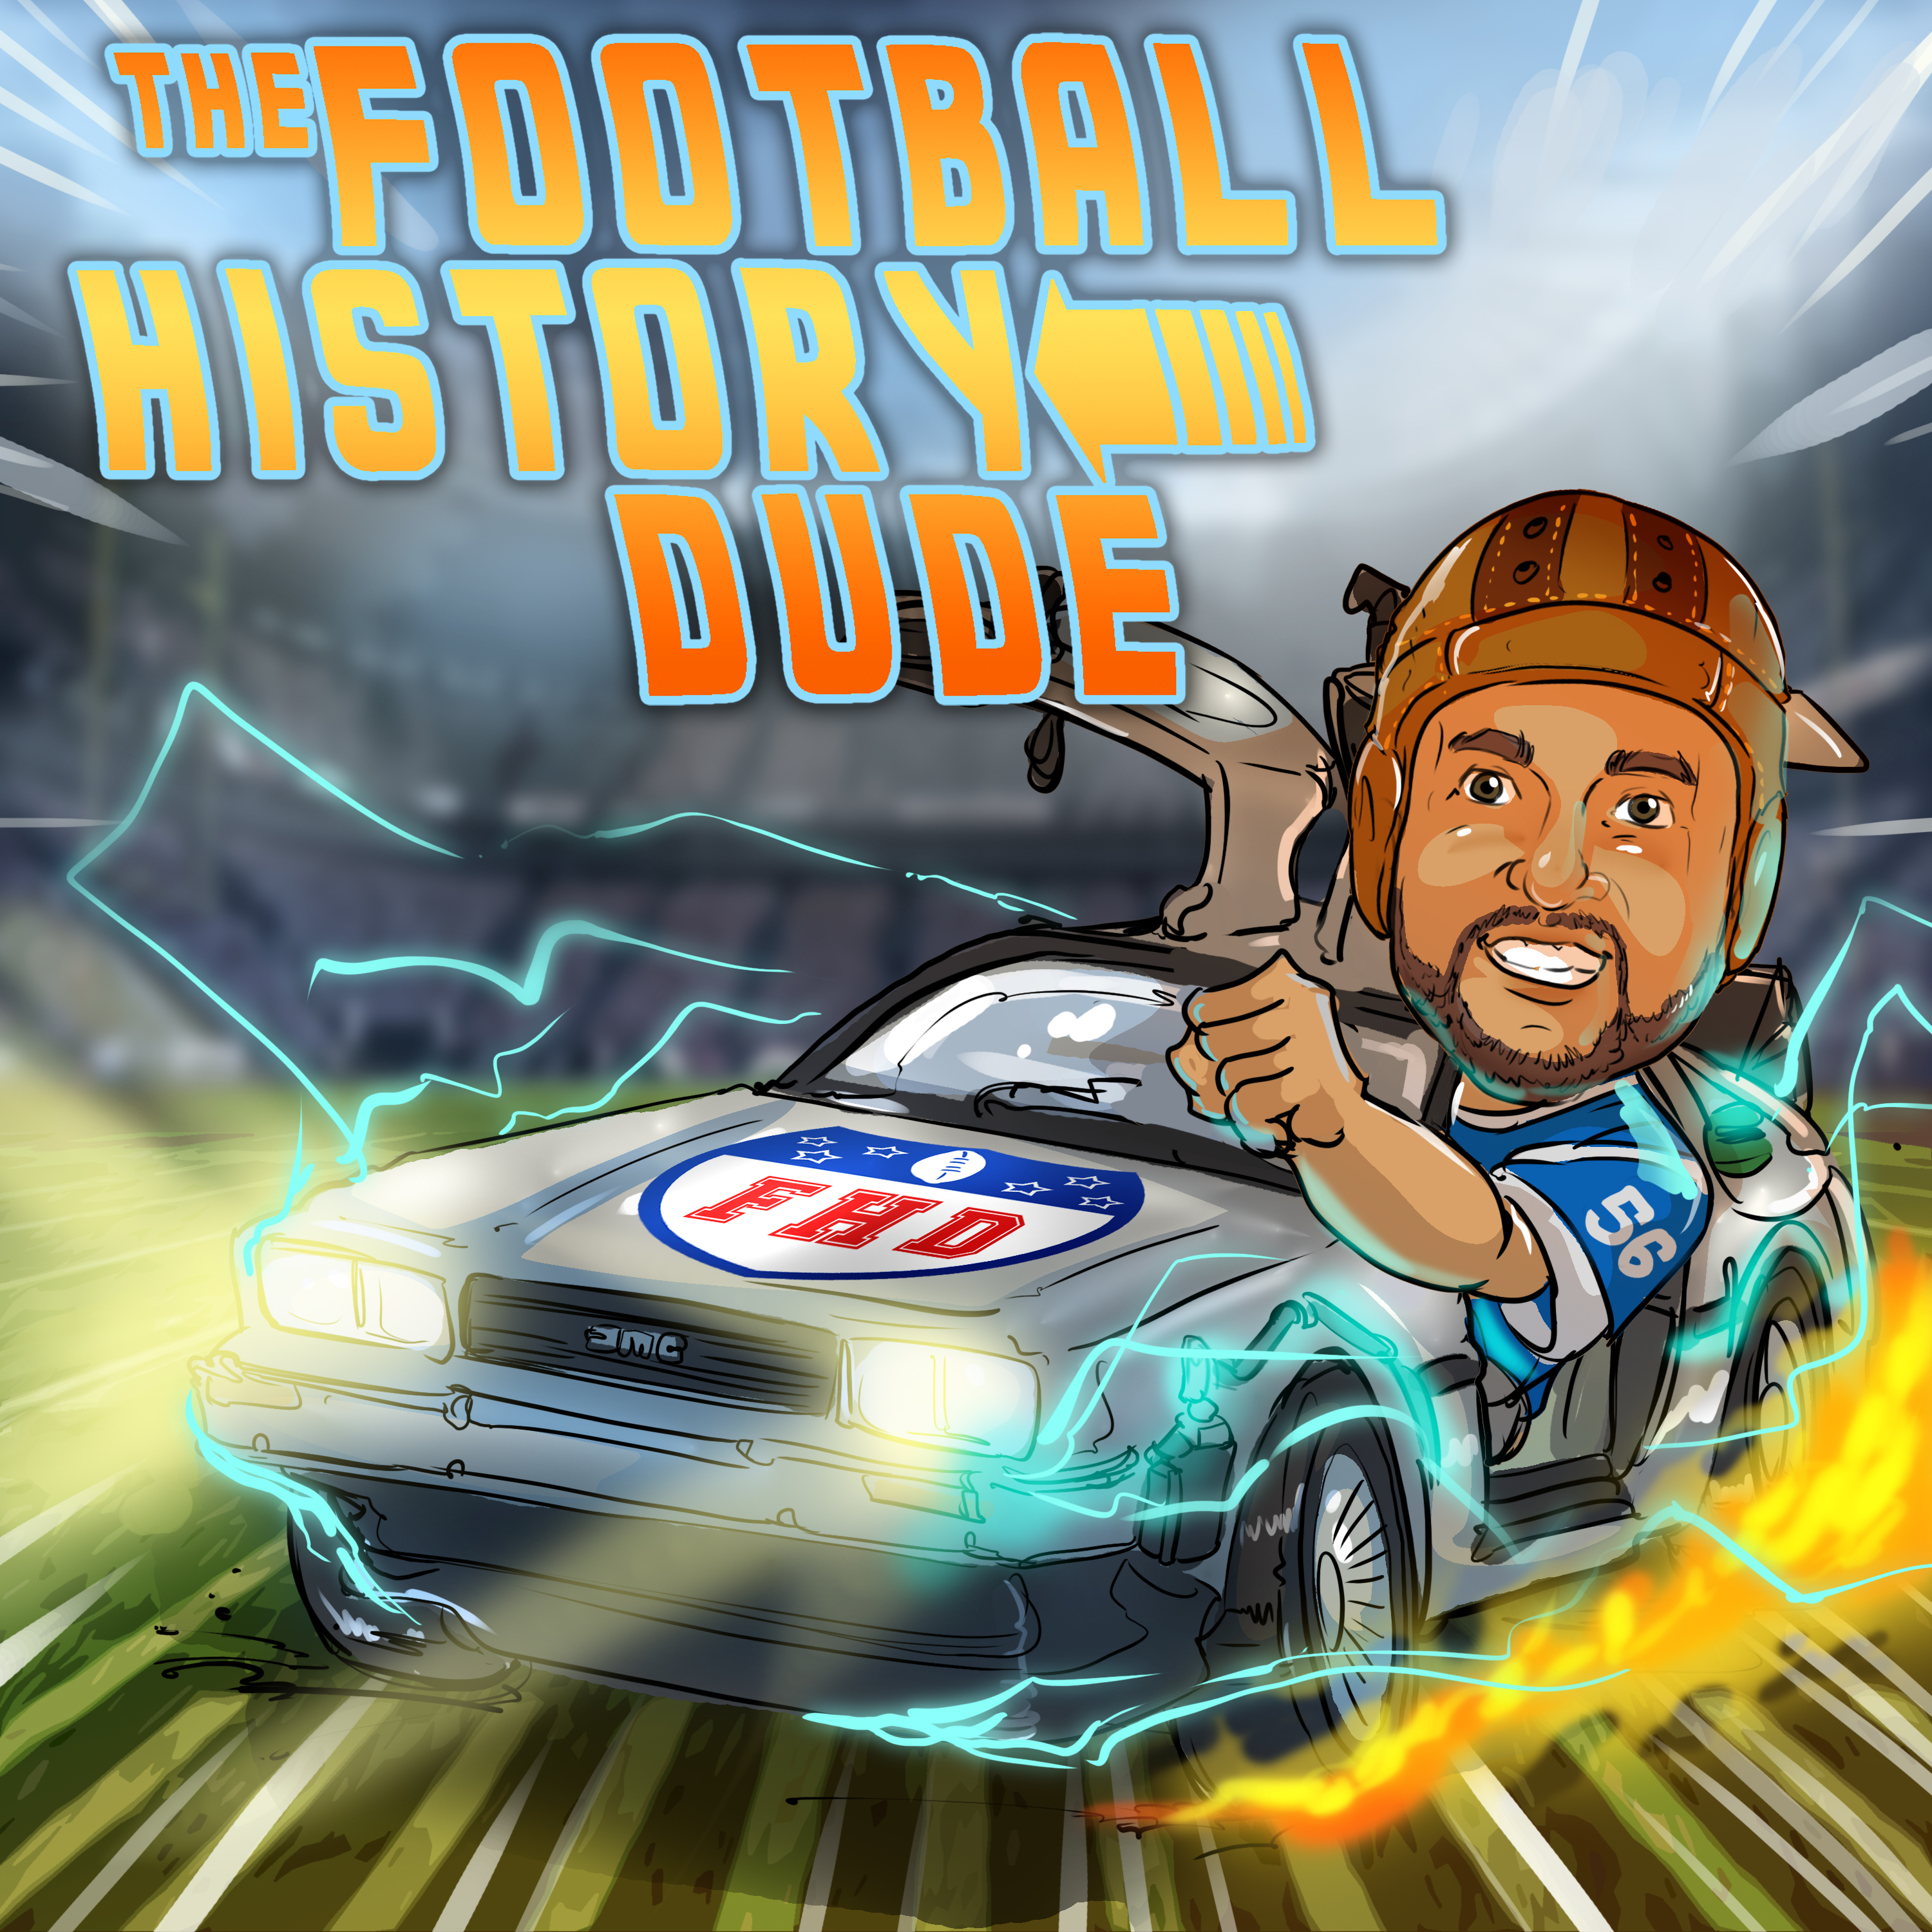 Artwork for The Football History Dude